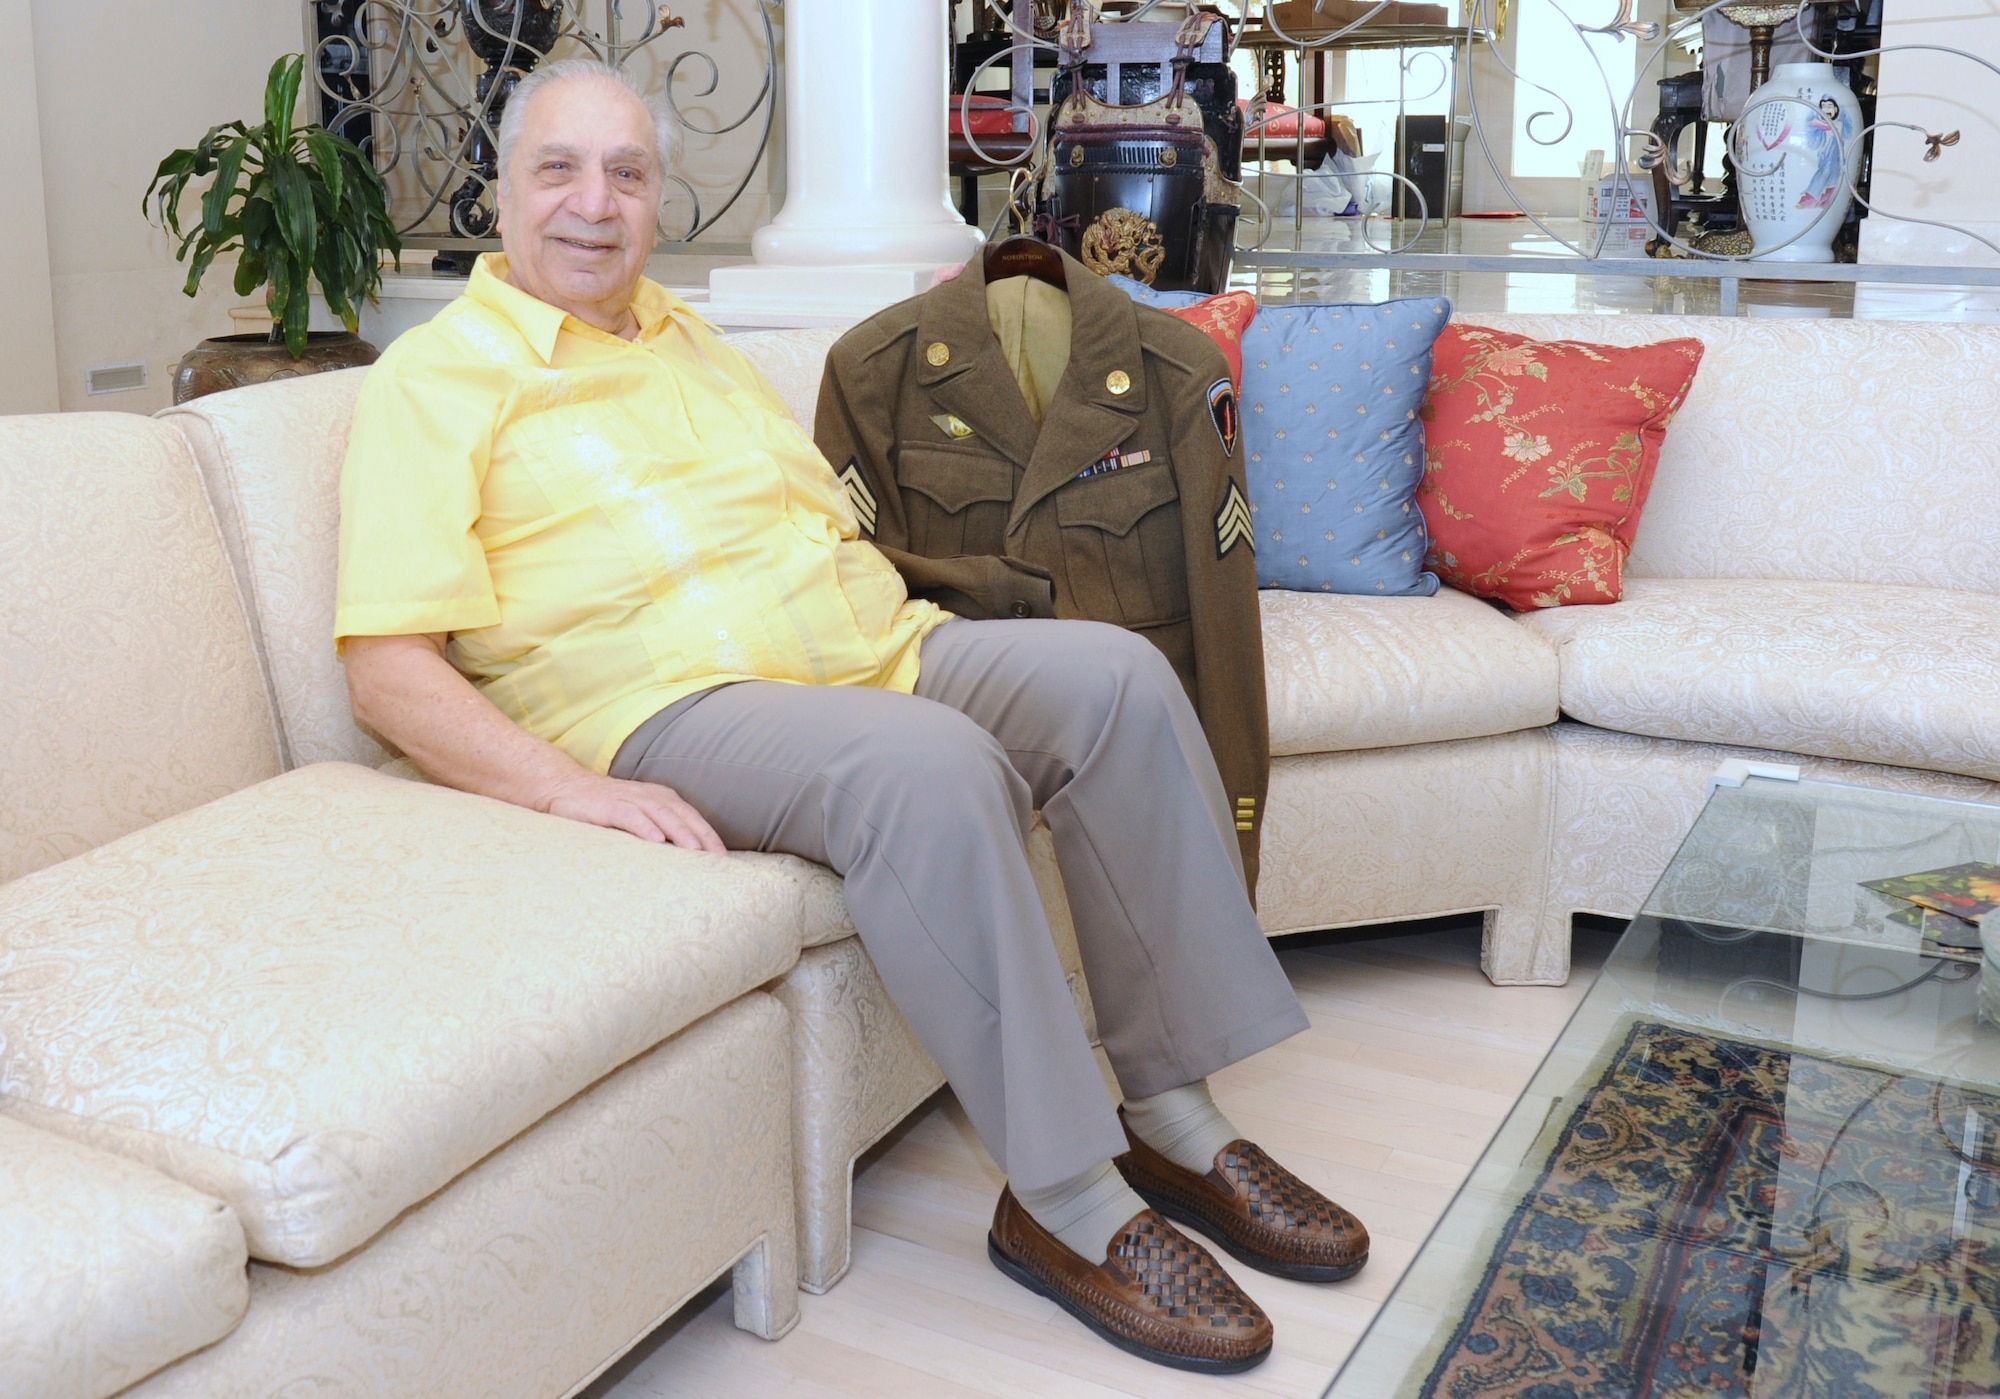 Gregory Melikian, a World War II veteran and Luke Air Force Base honorary commander, displays his Army service jacket from that period at his house in Phoenix Jan. 6. The patch on the right sleeve indicates the Meritorius Unit Award, which was among the first of this award ever given.